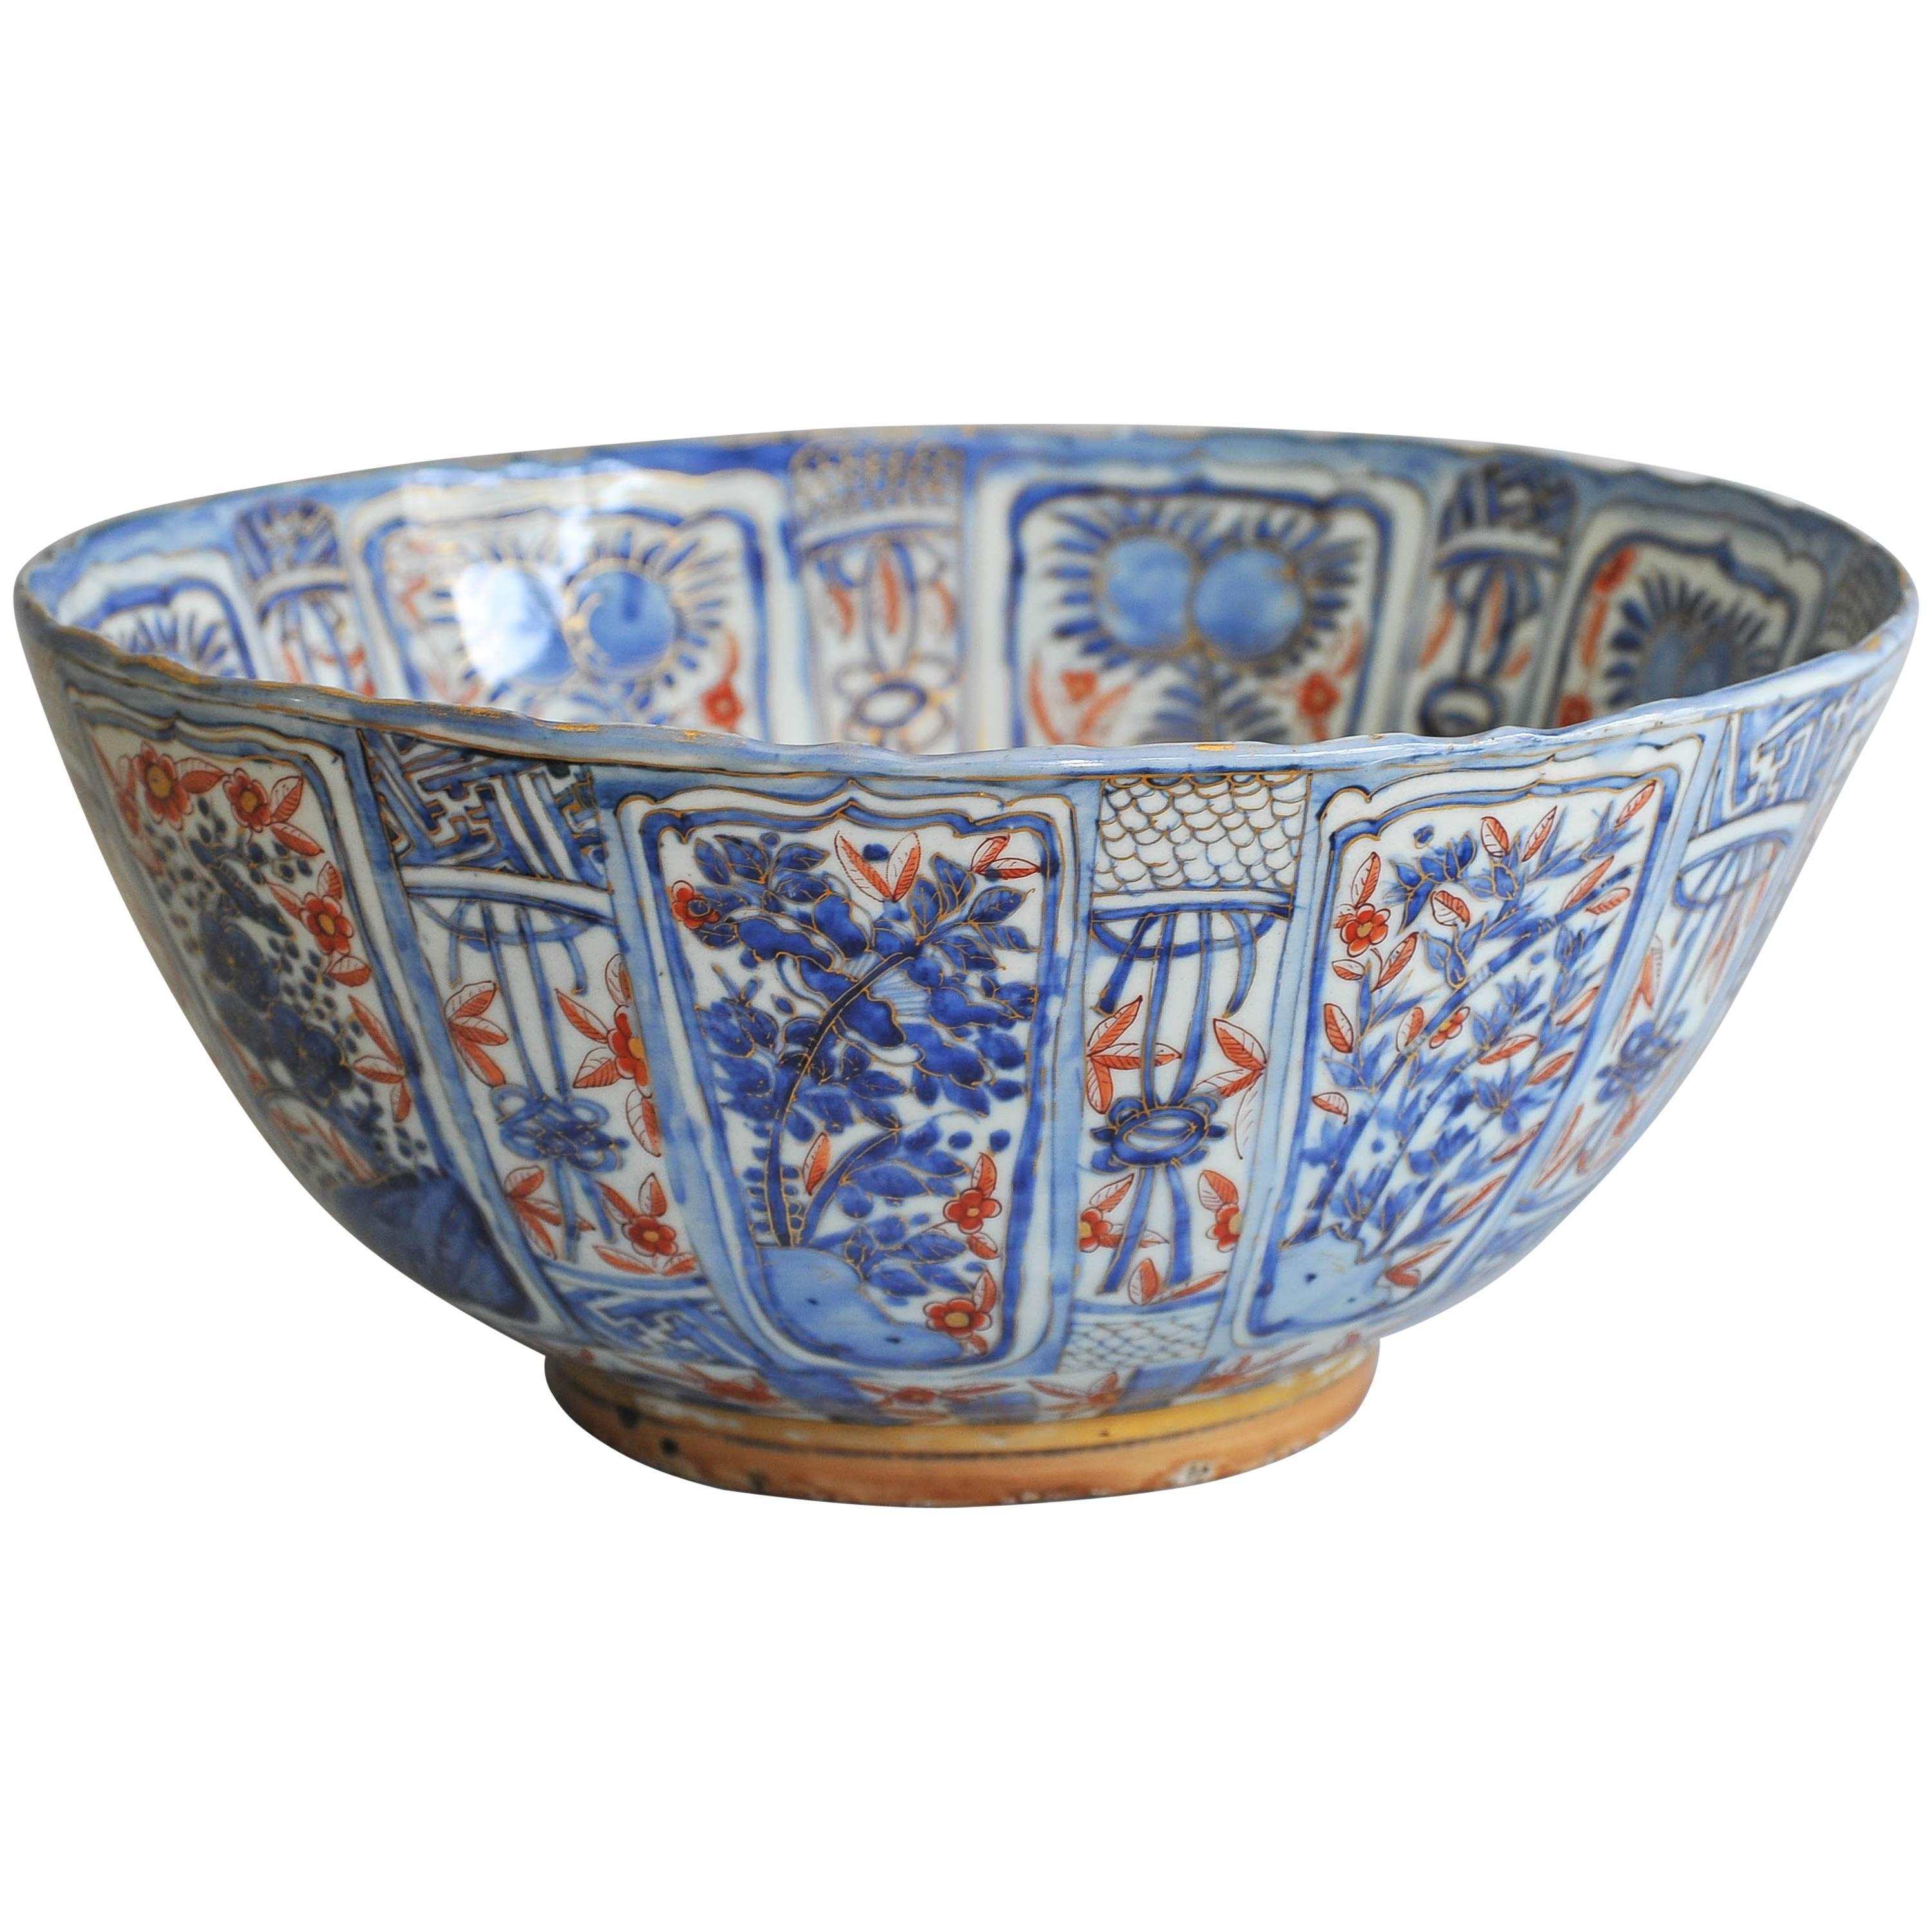 A Large and Perfect Chinese Blue and White Wanli Clobbered Bowl, circa 1620